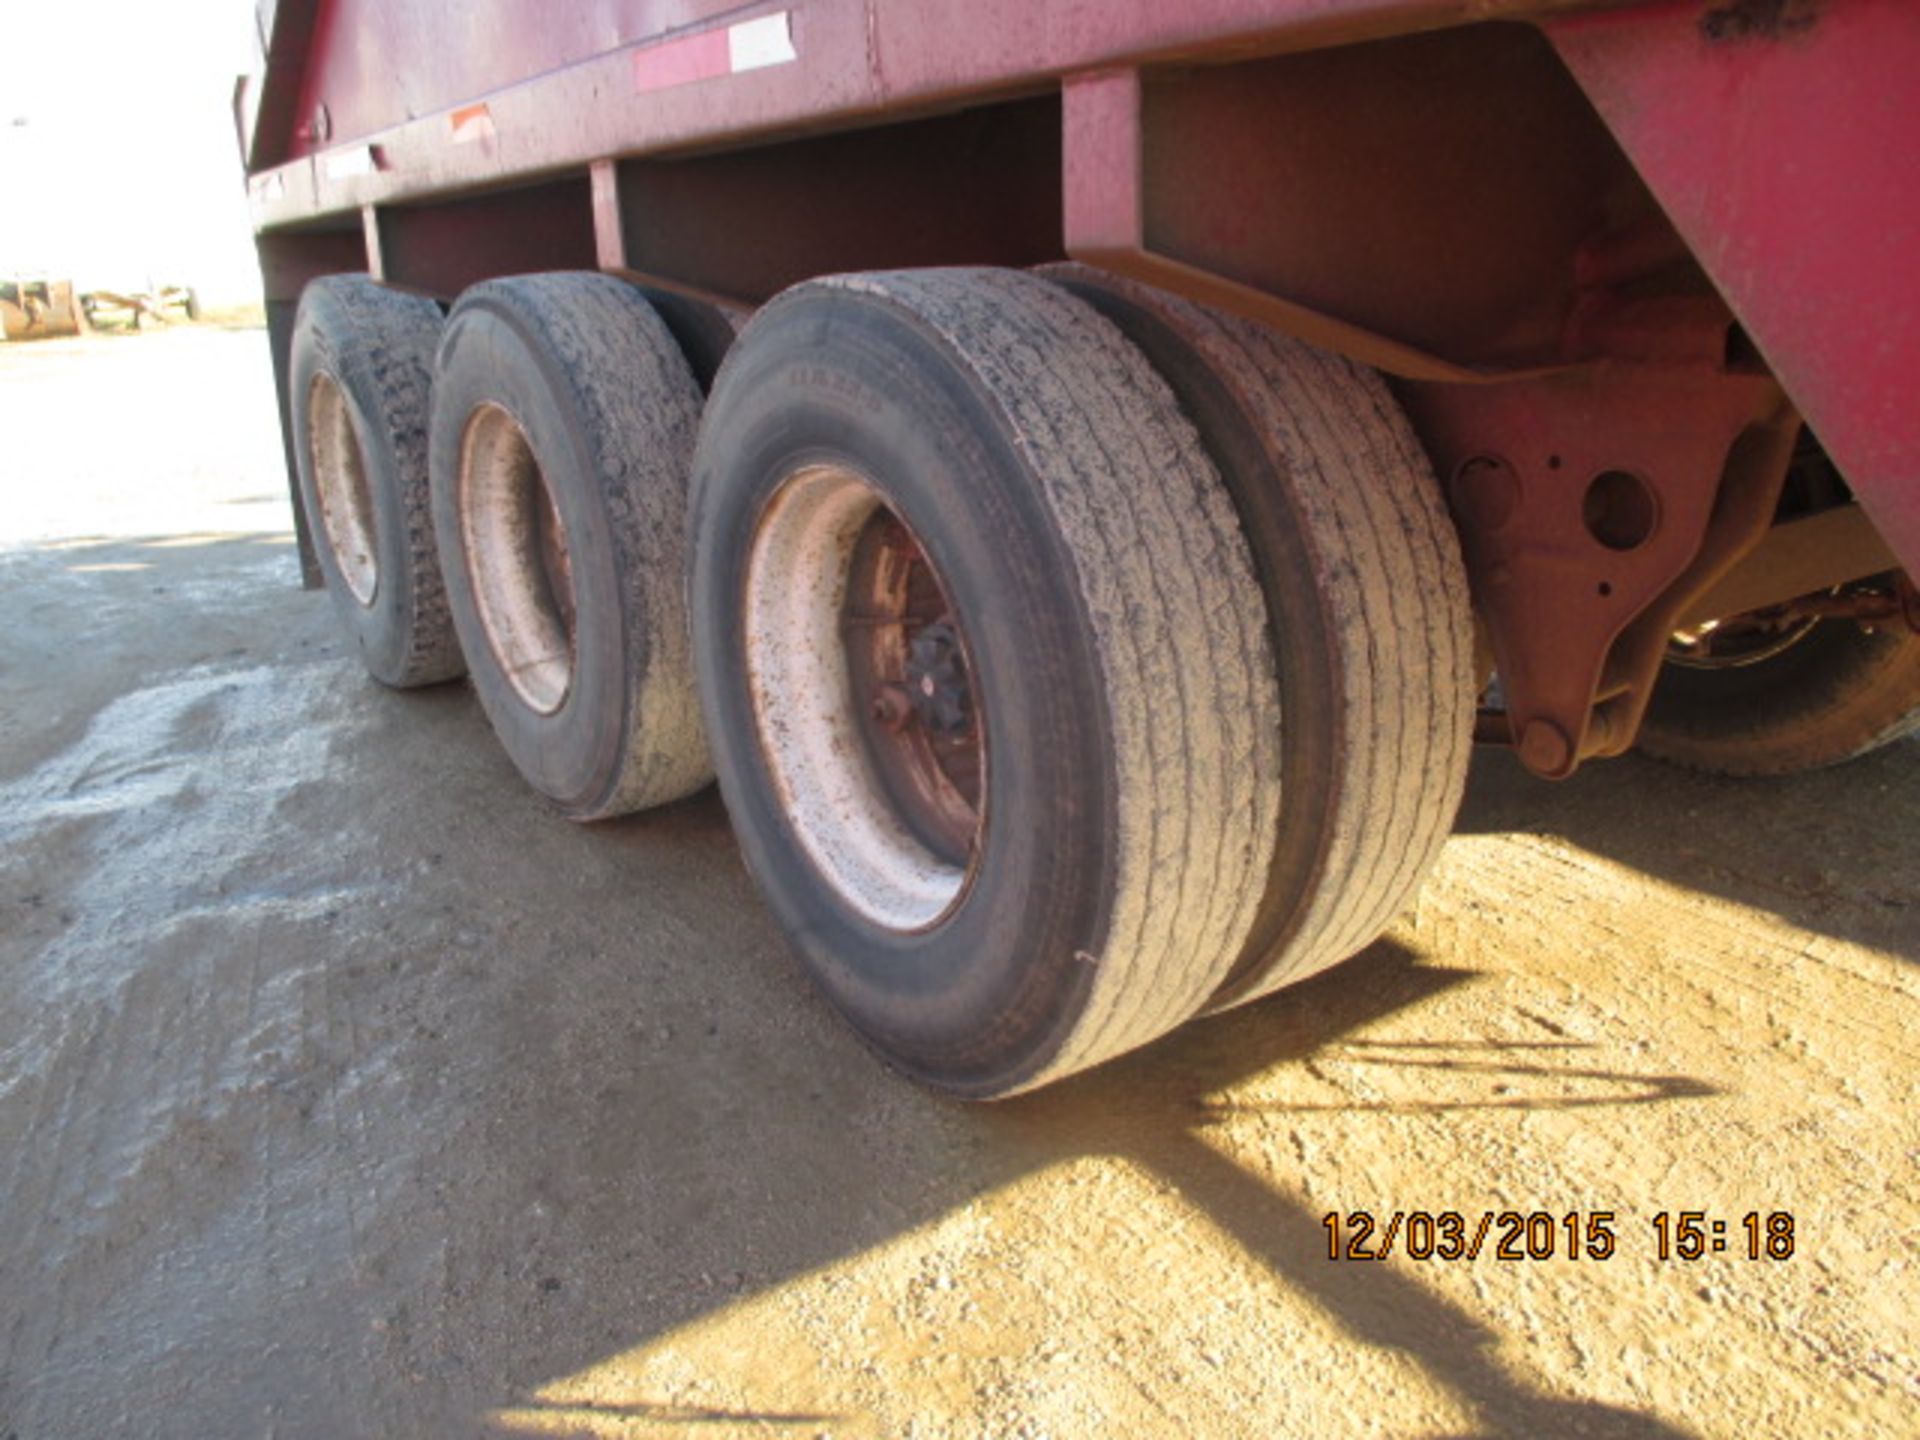 TITLE-Homemade tri-axle belly dump, missing VIN plate, unit BD-09 - Image 3 of 5